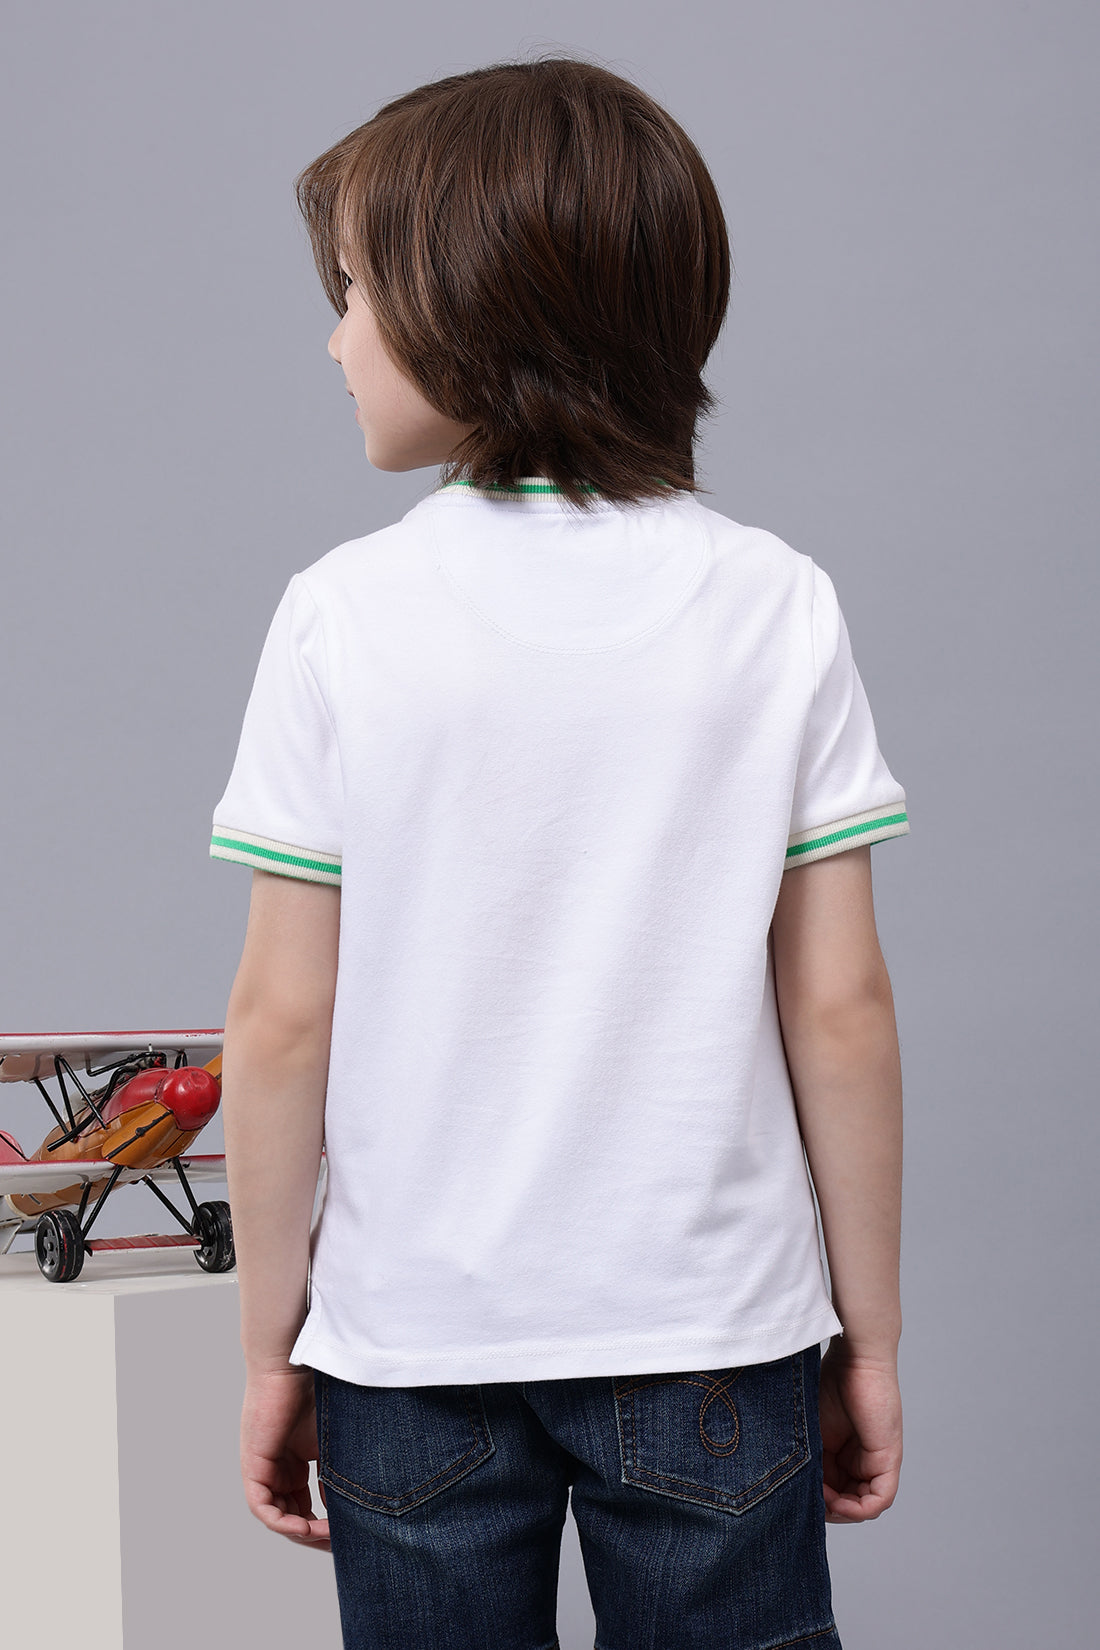 One Friday Kids Boys 100% Cotton White Round Neck Embroidered T-shirt